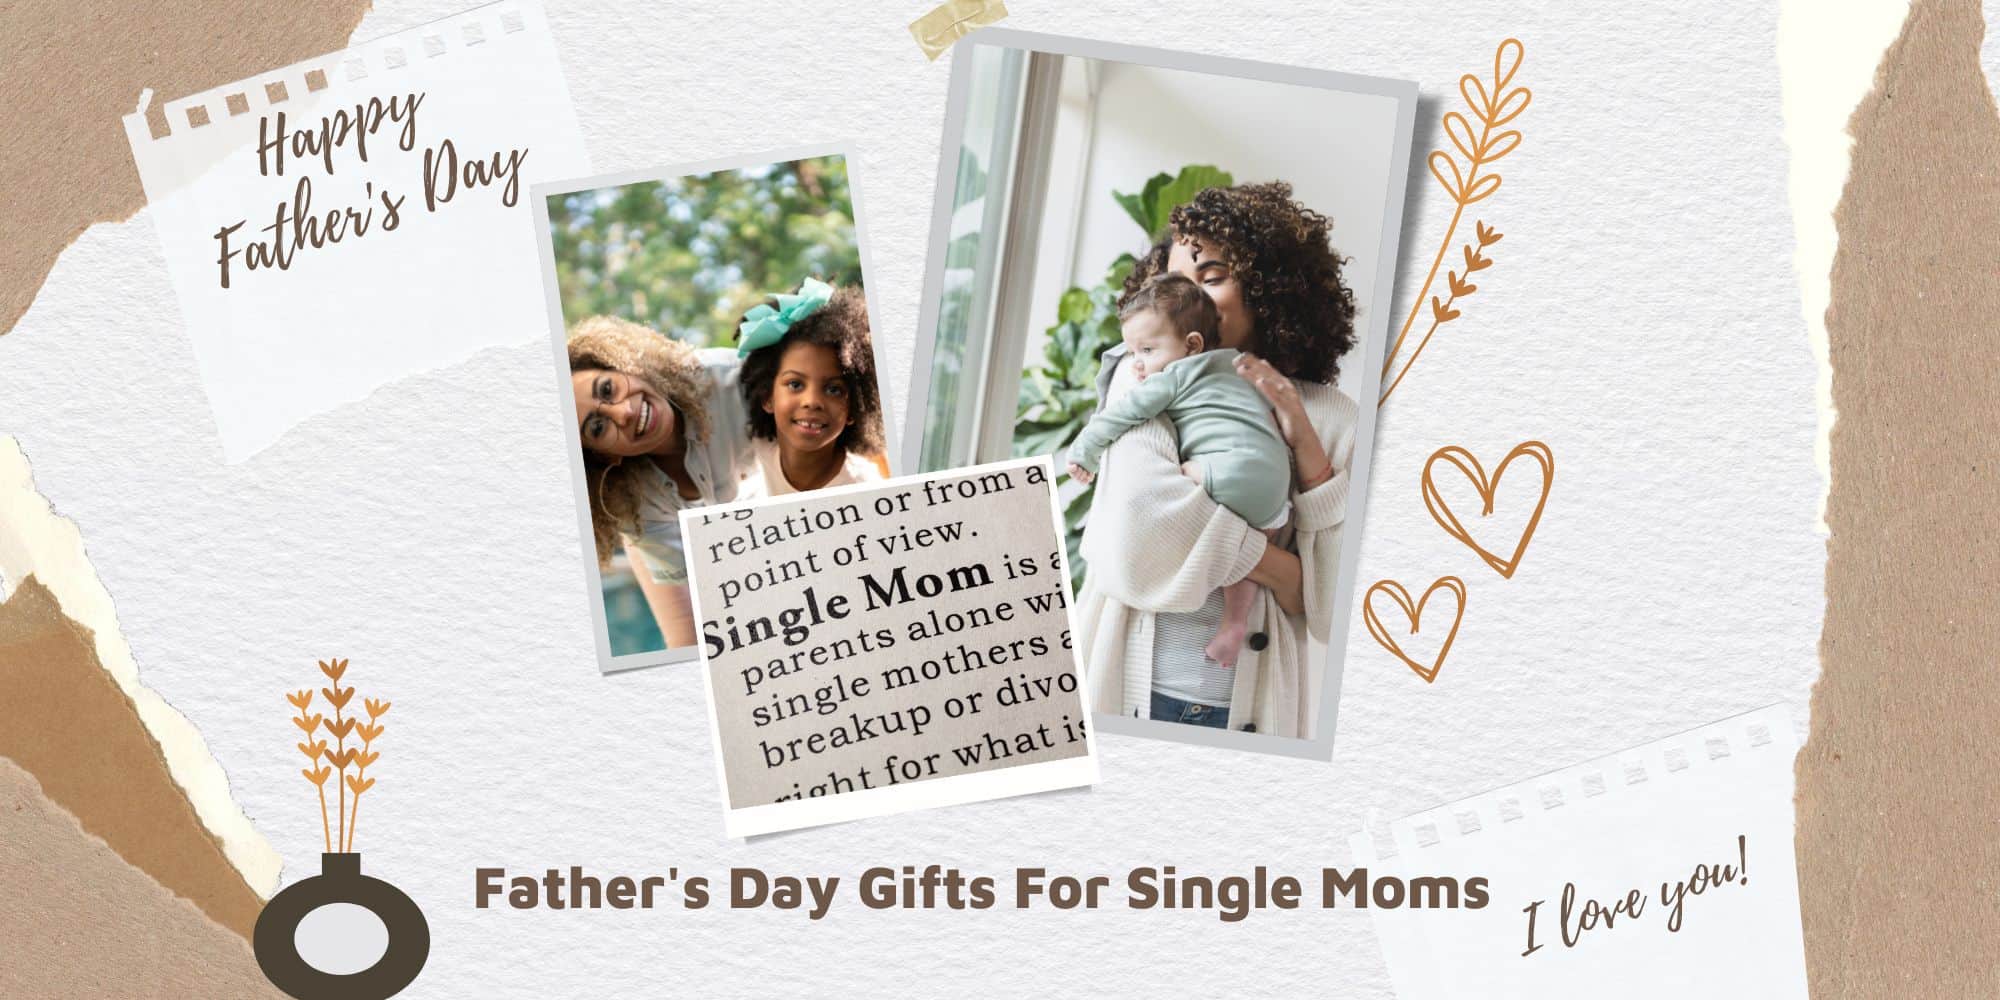 15 Thoughtful Father’s Day Gifts for Single Moms